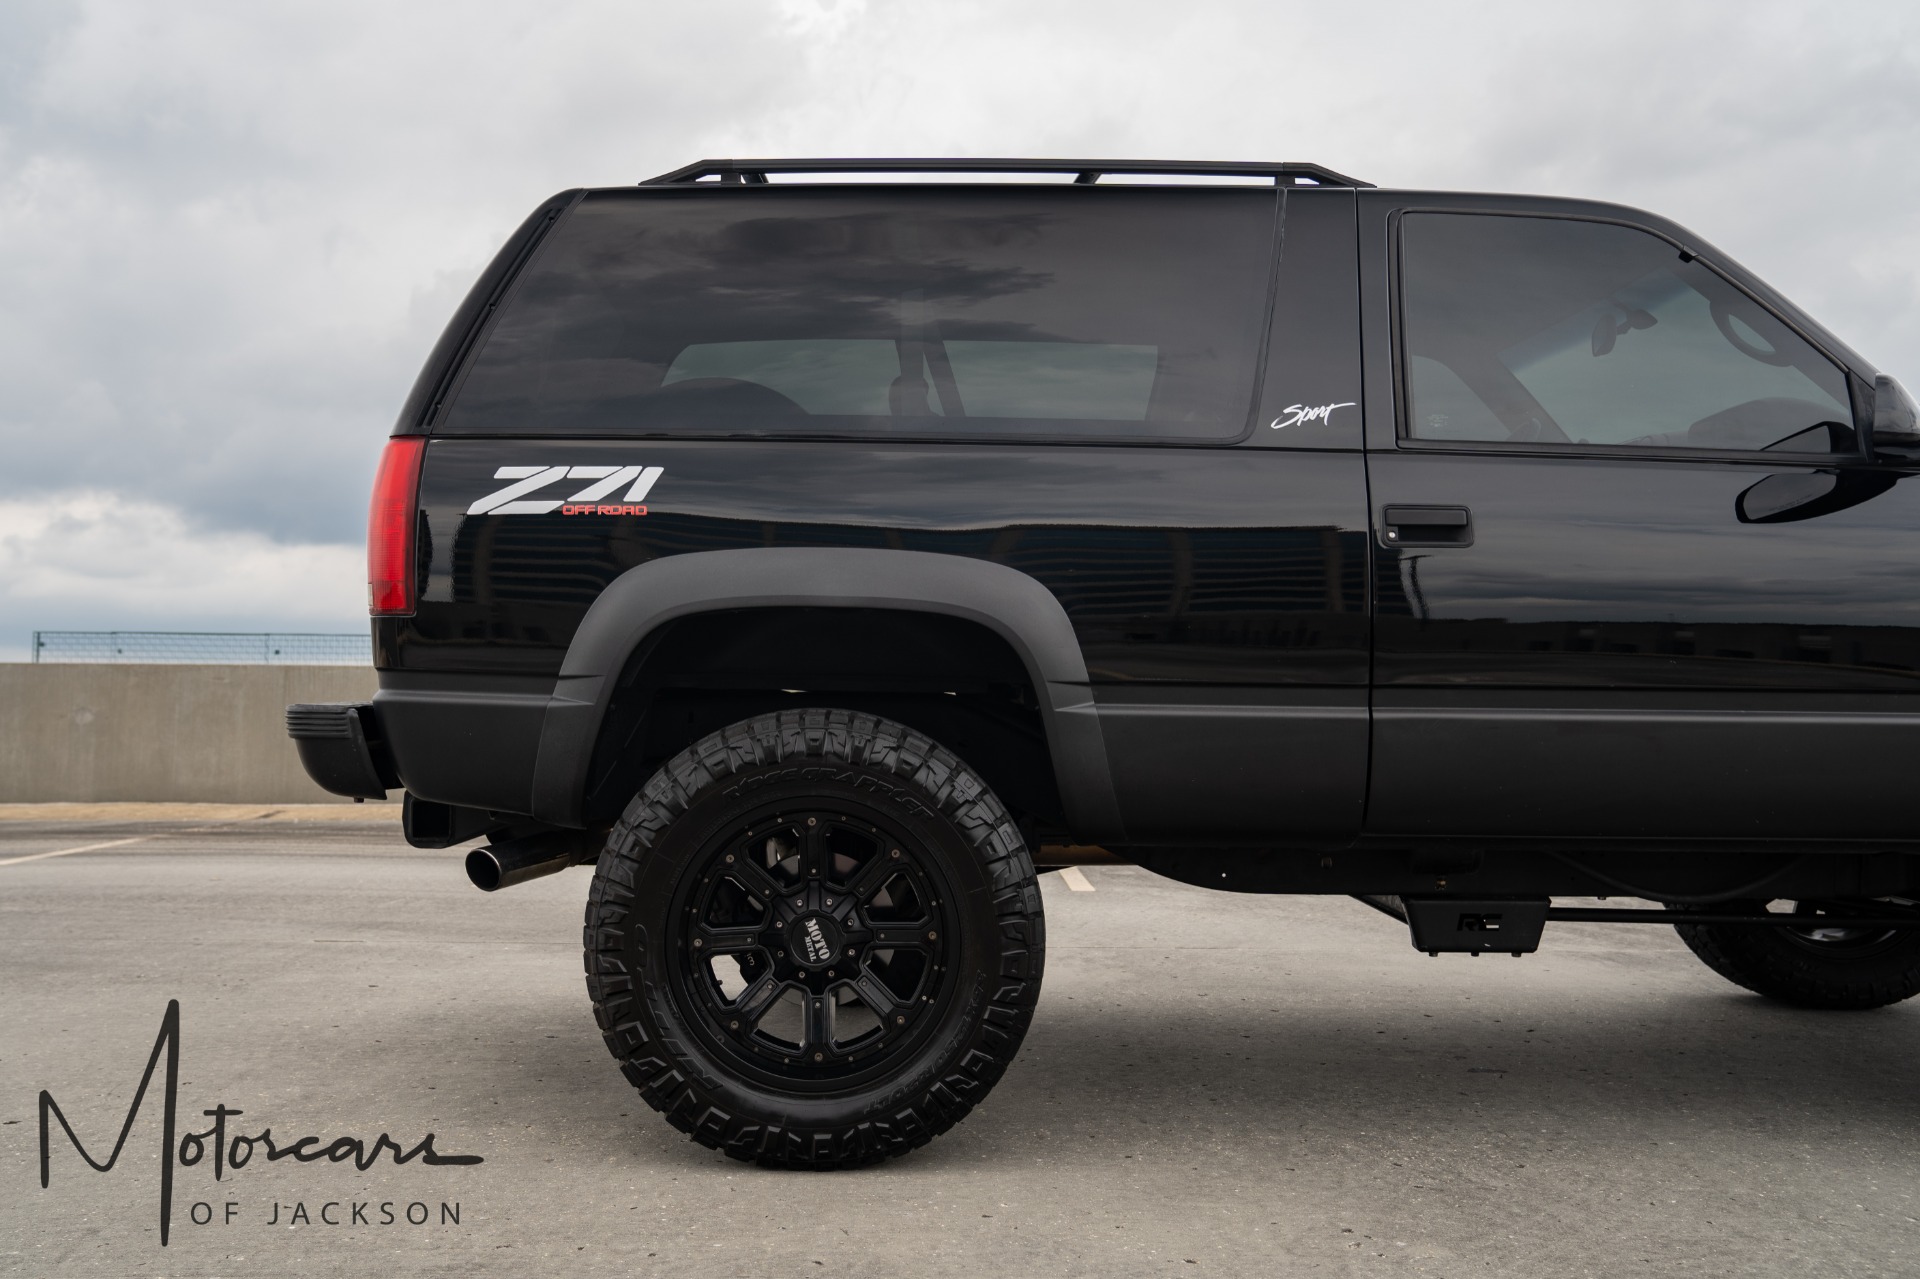 Used-1999-Chevrolet-Tahoe-4WD-for-sale-Jackson-MS